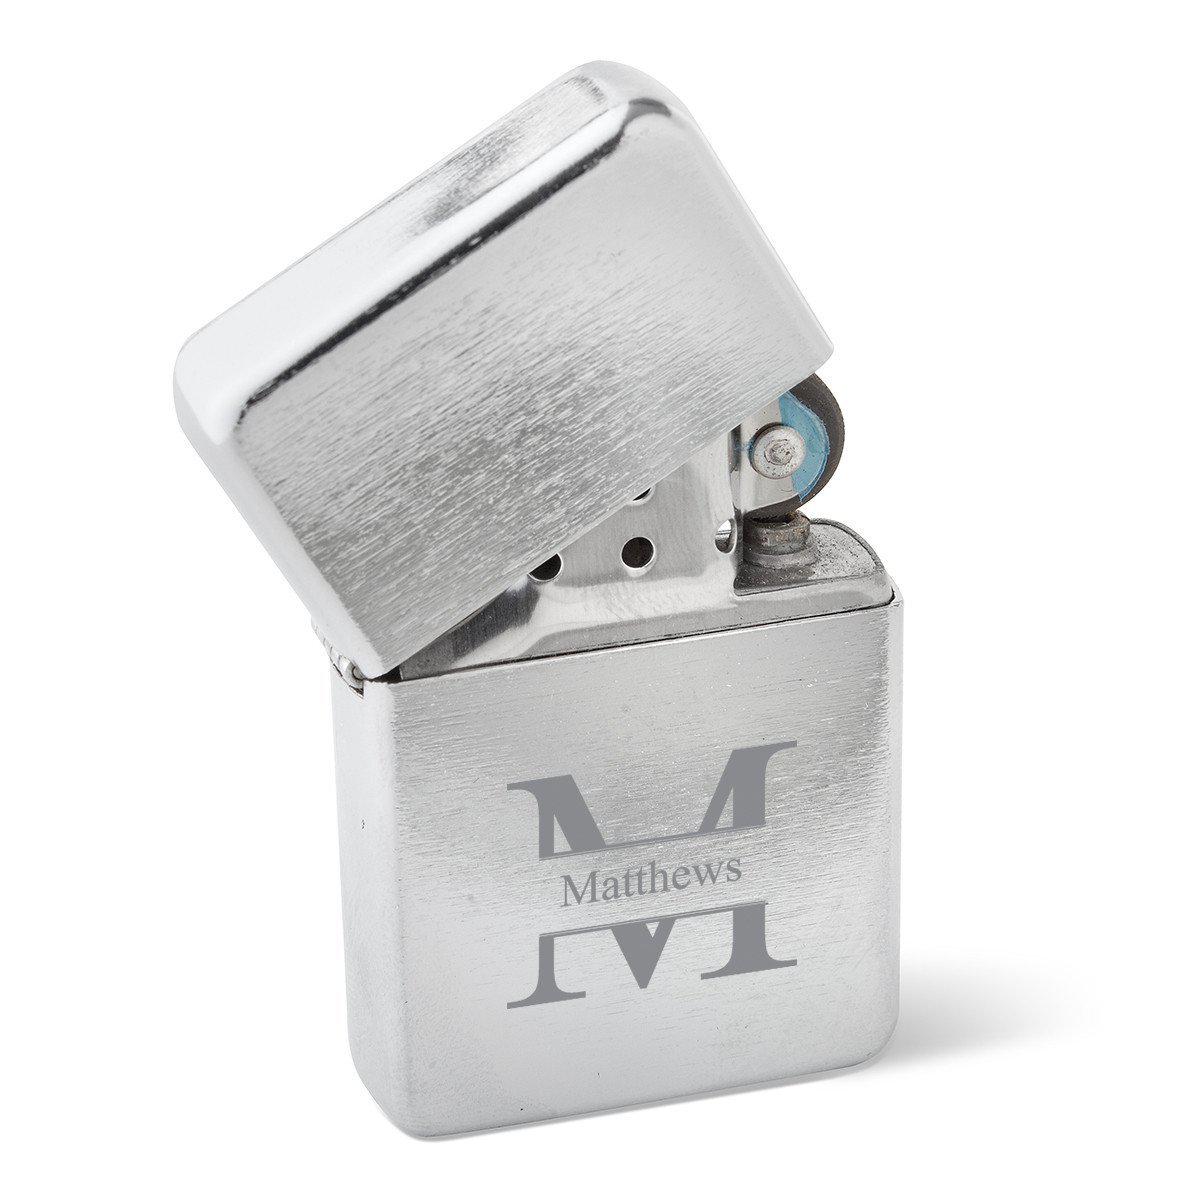 Personalized Brushed Stainless Steel Wind proof Lighter - Engraved Brushed Chrome Lighter